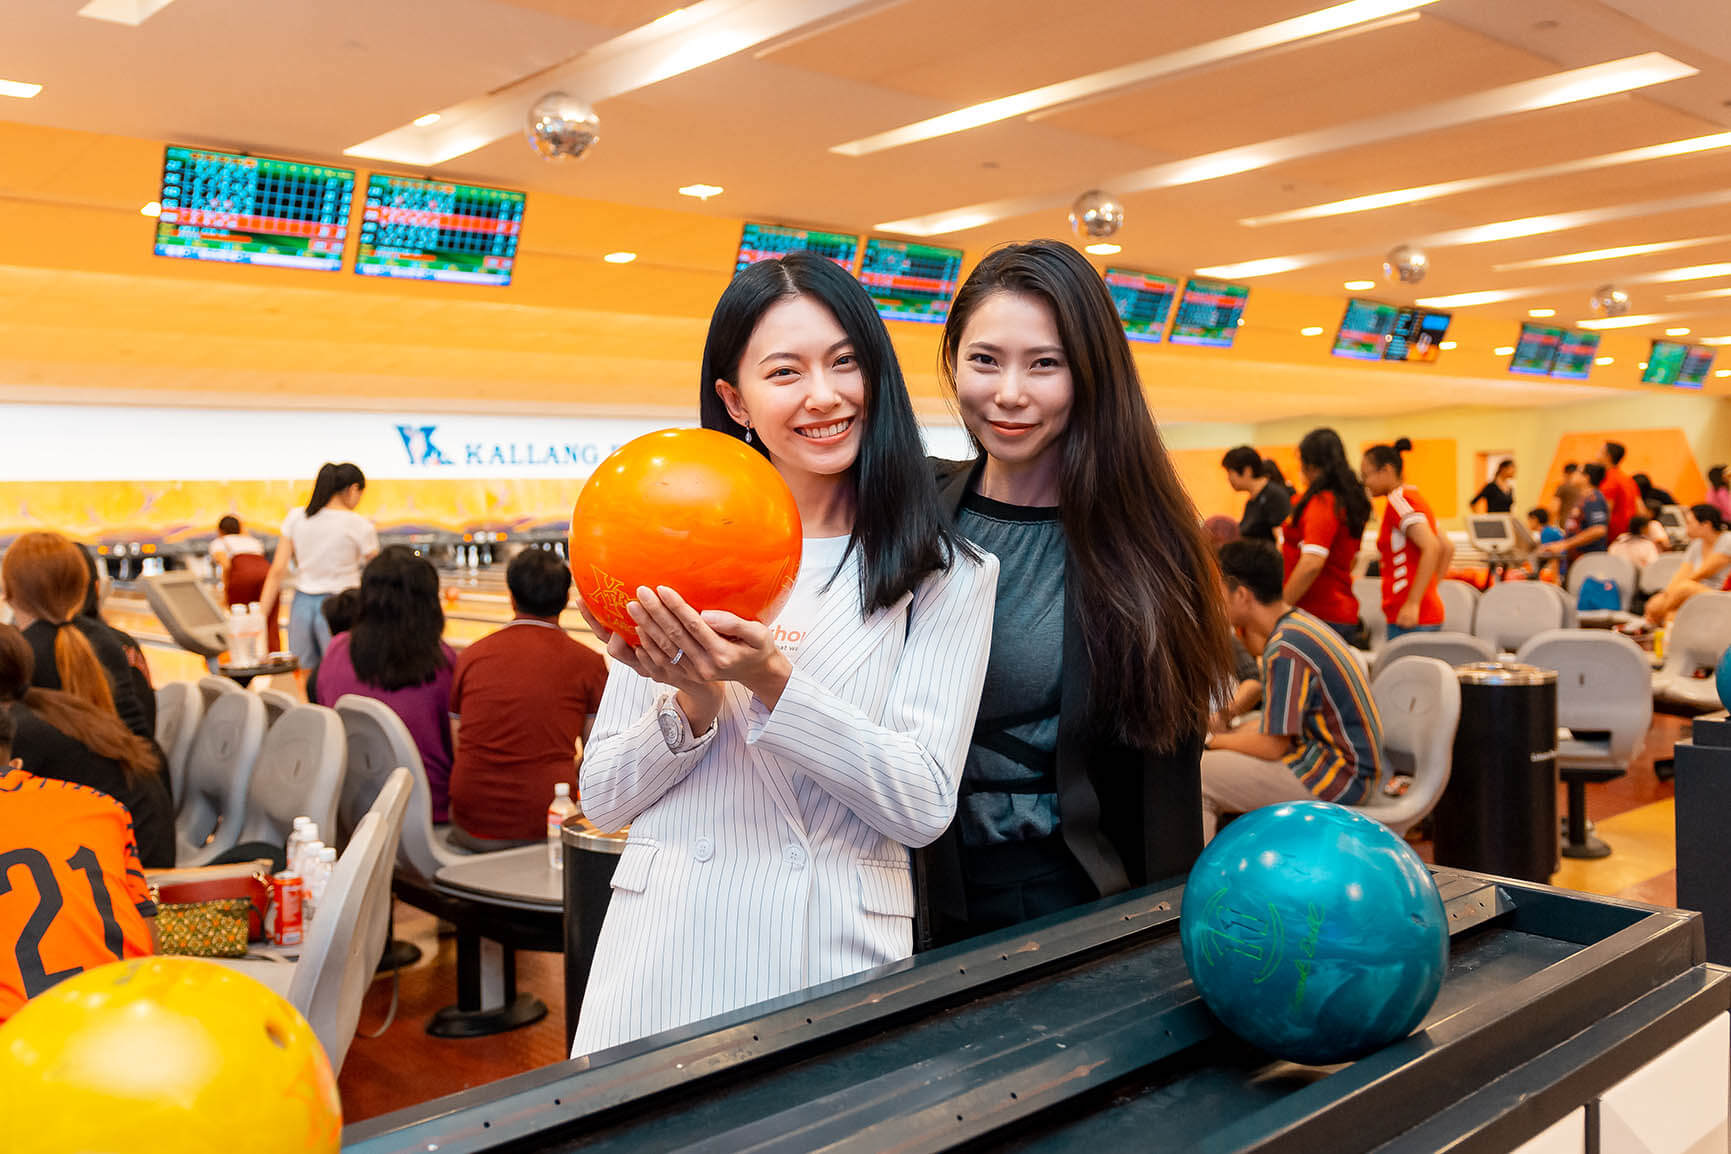 strike-one-family-day-2019-celebrating-family-giving-and-community-through-bowling-rhonda-wong-race-wong